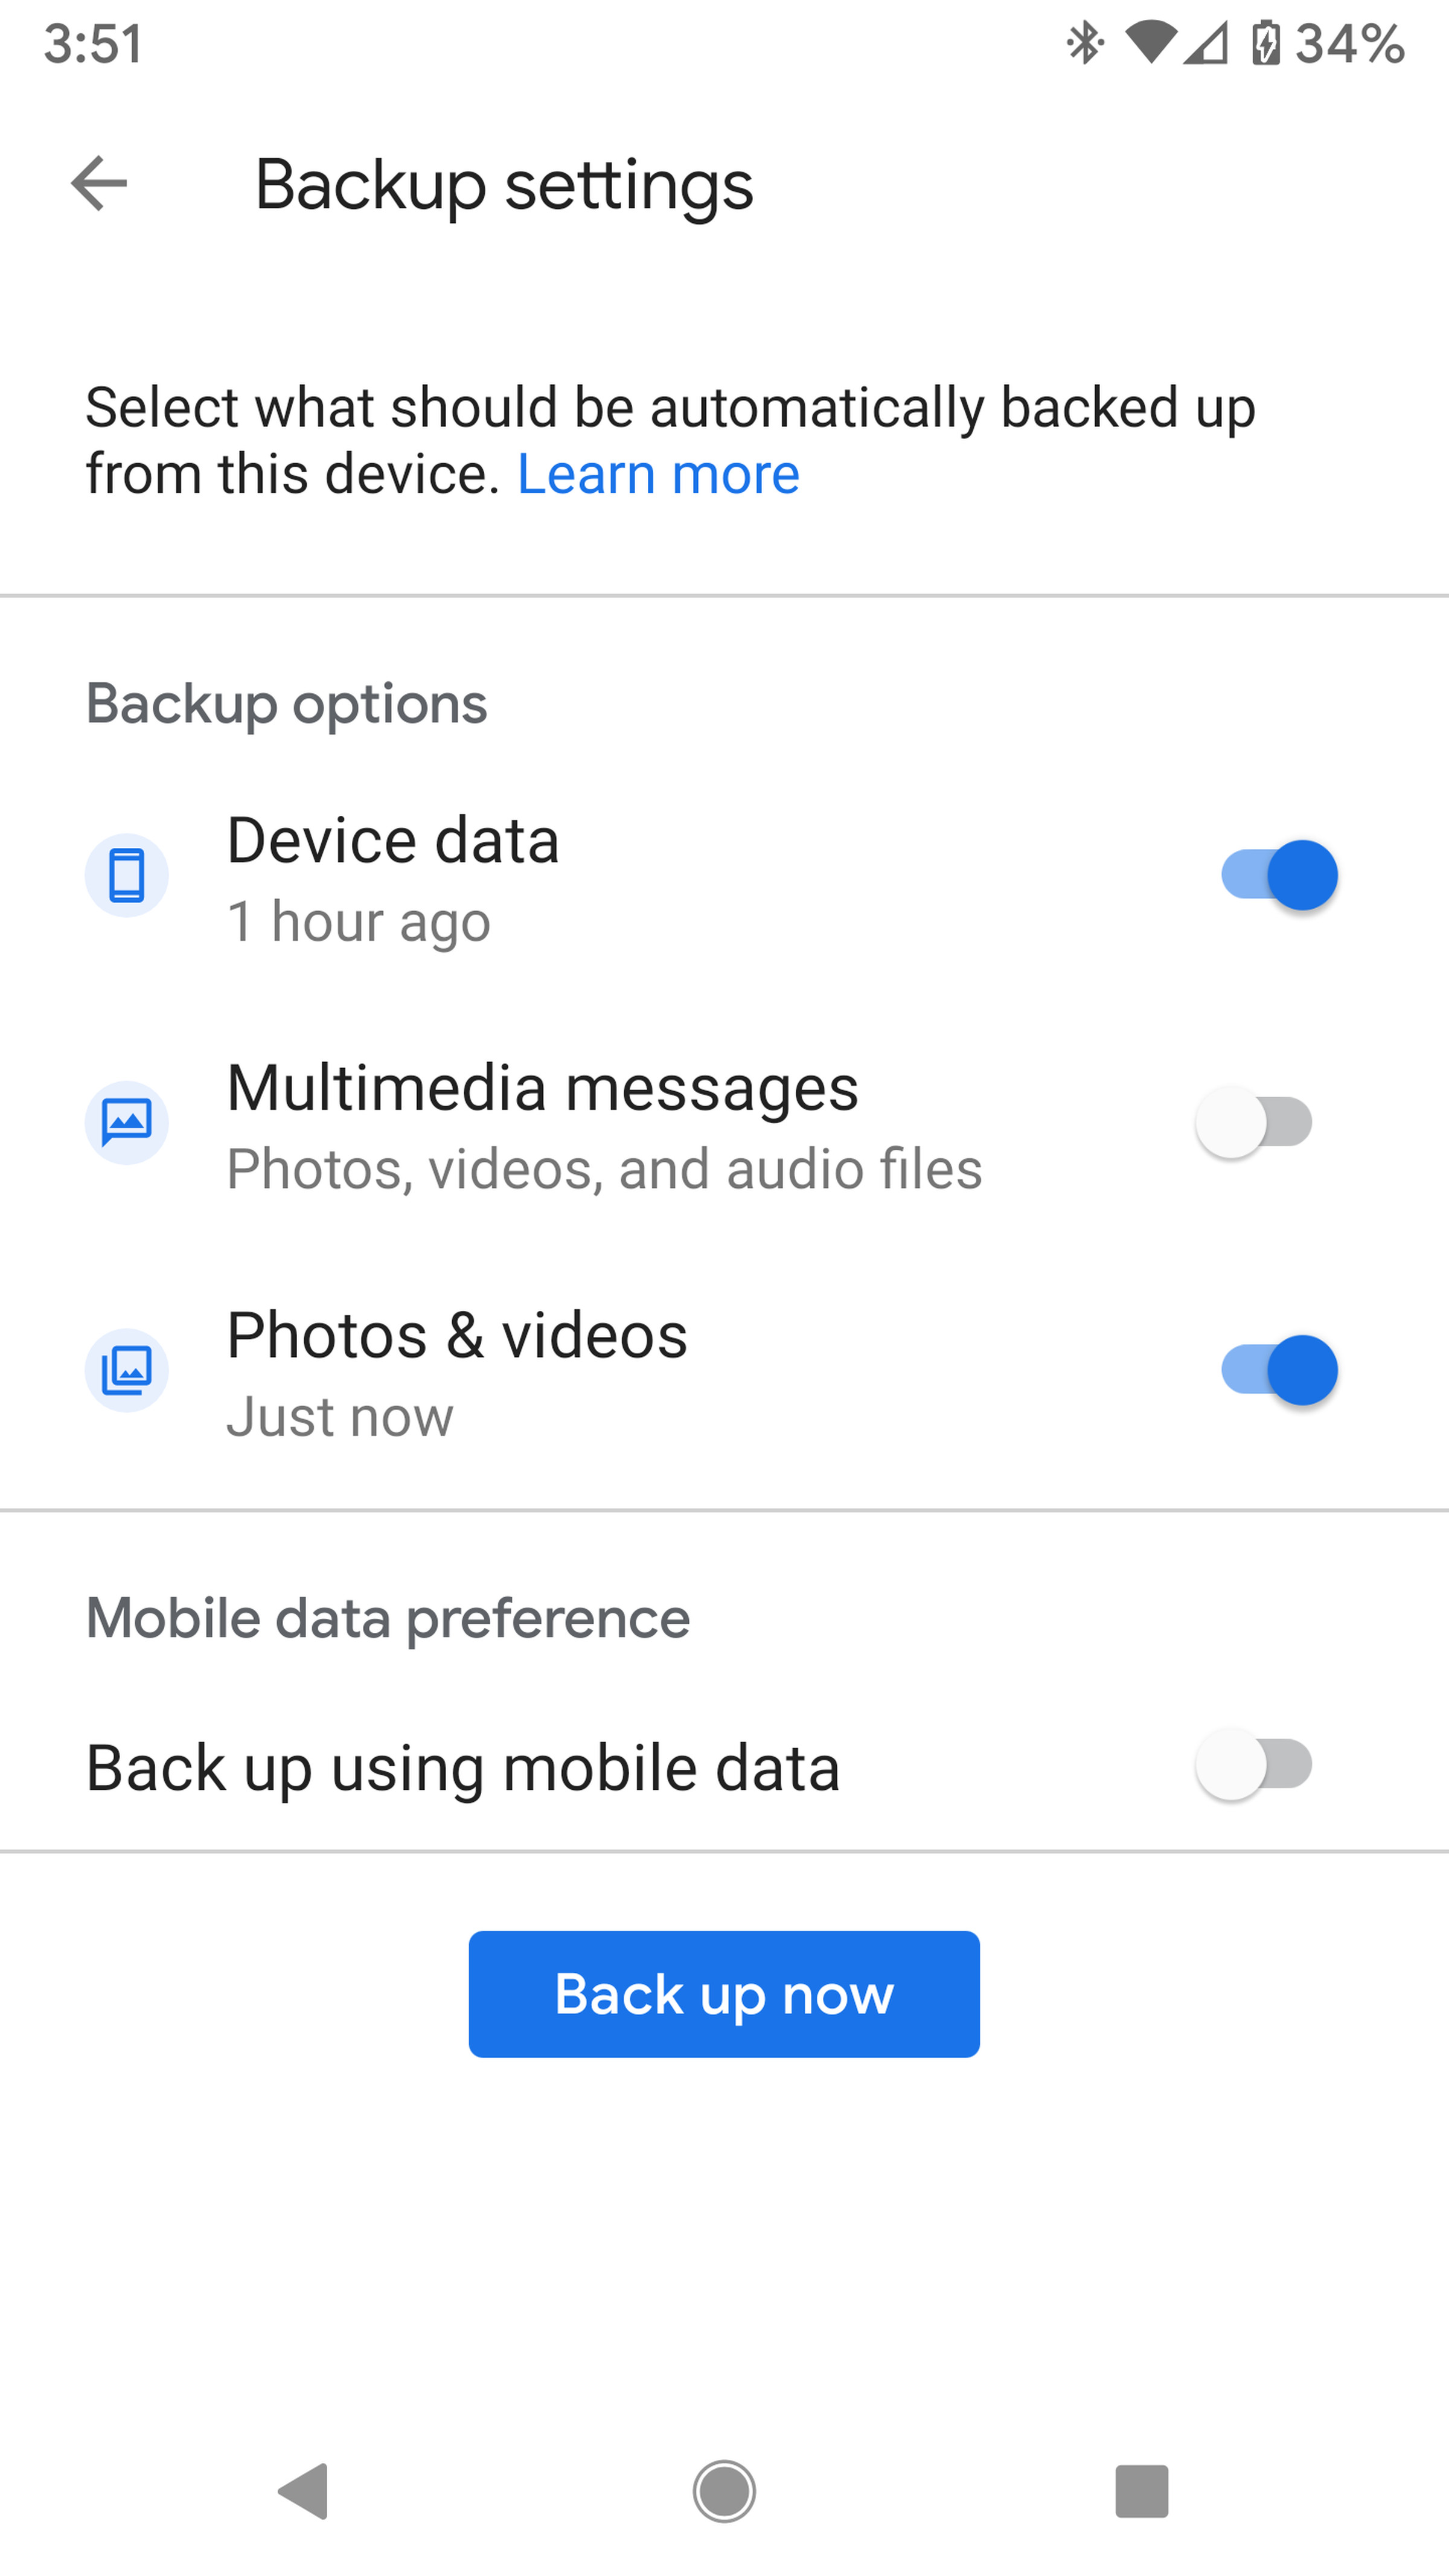 You can then choose among three types of data to back up via Google One.